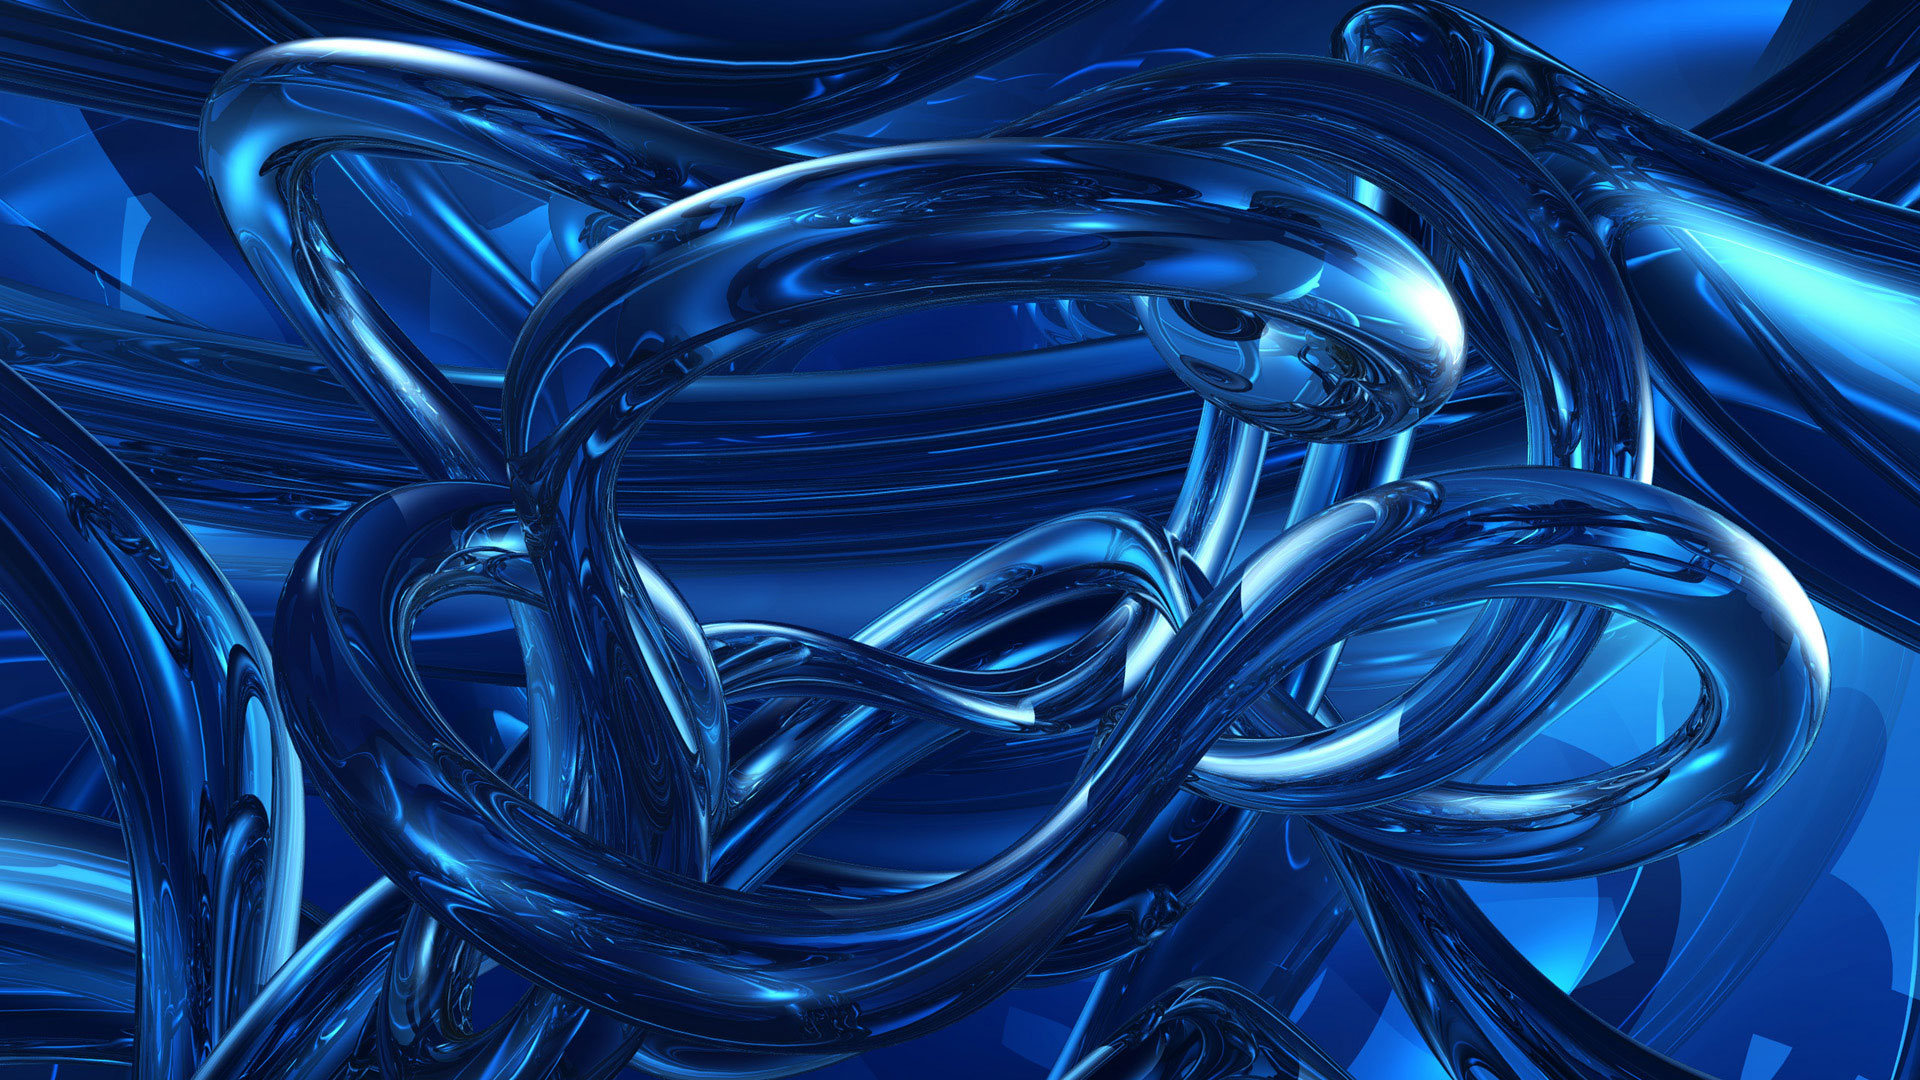 Dark Blue Abstracts6533112144 - Dark Blue Abstracts - Dark, blue, Abtsract, Abstracts